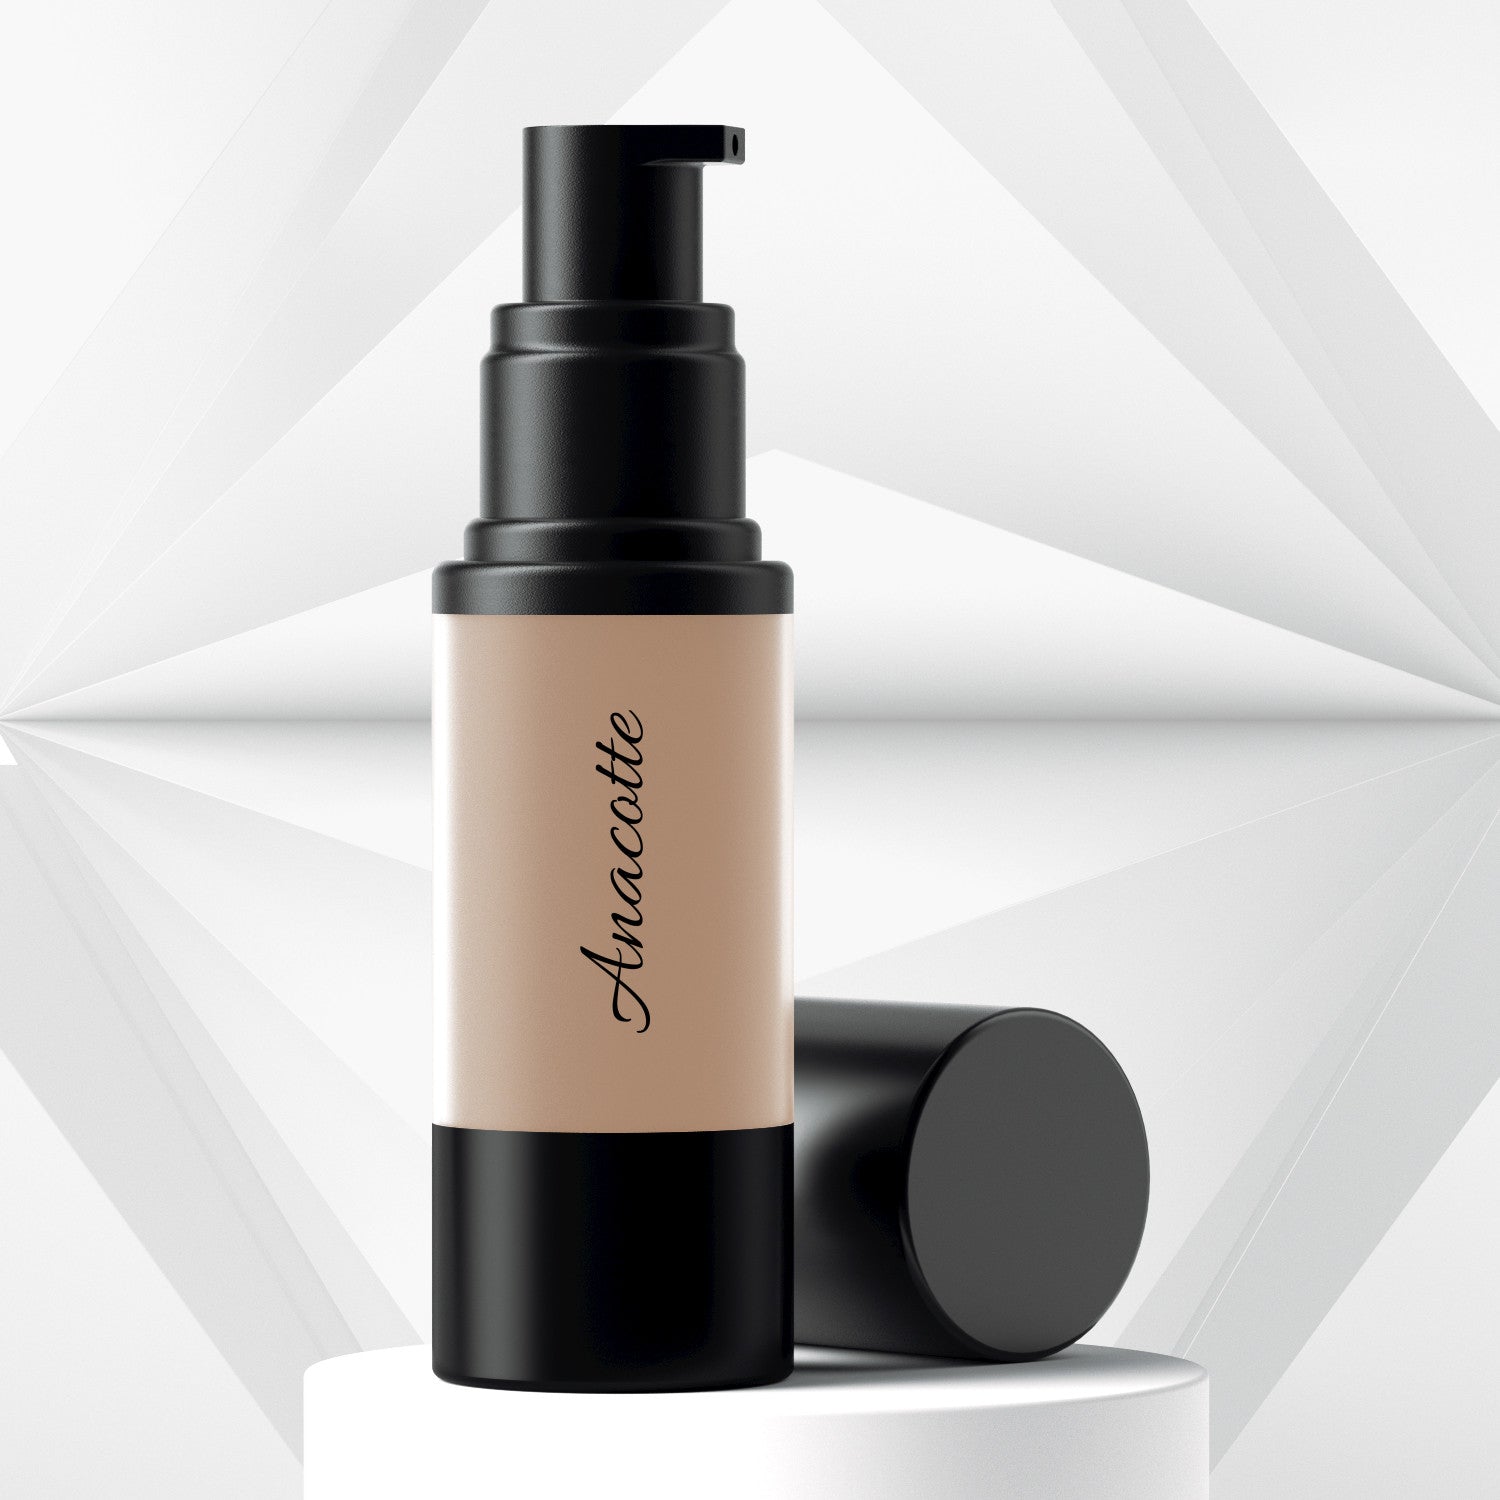 Anacotte Anti-aging and Long Wear Liquid Foundation Makeup 0.5oz